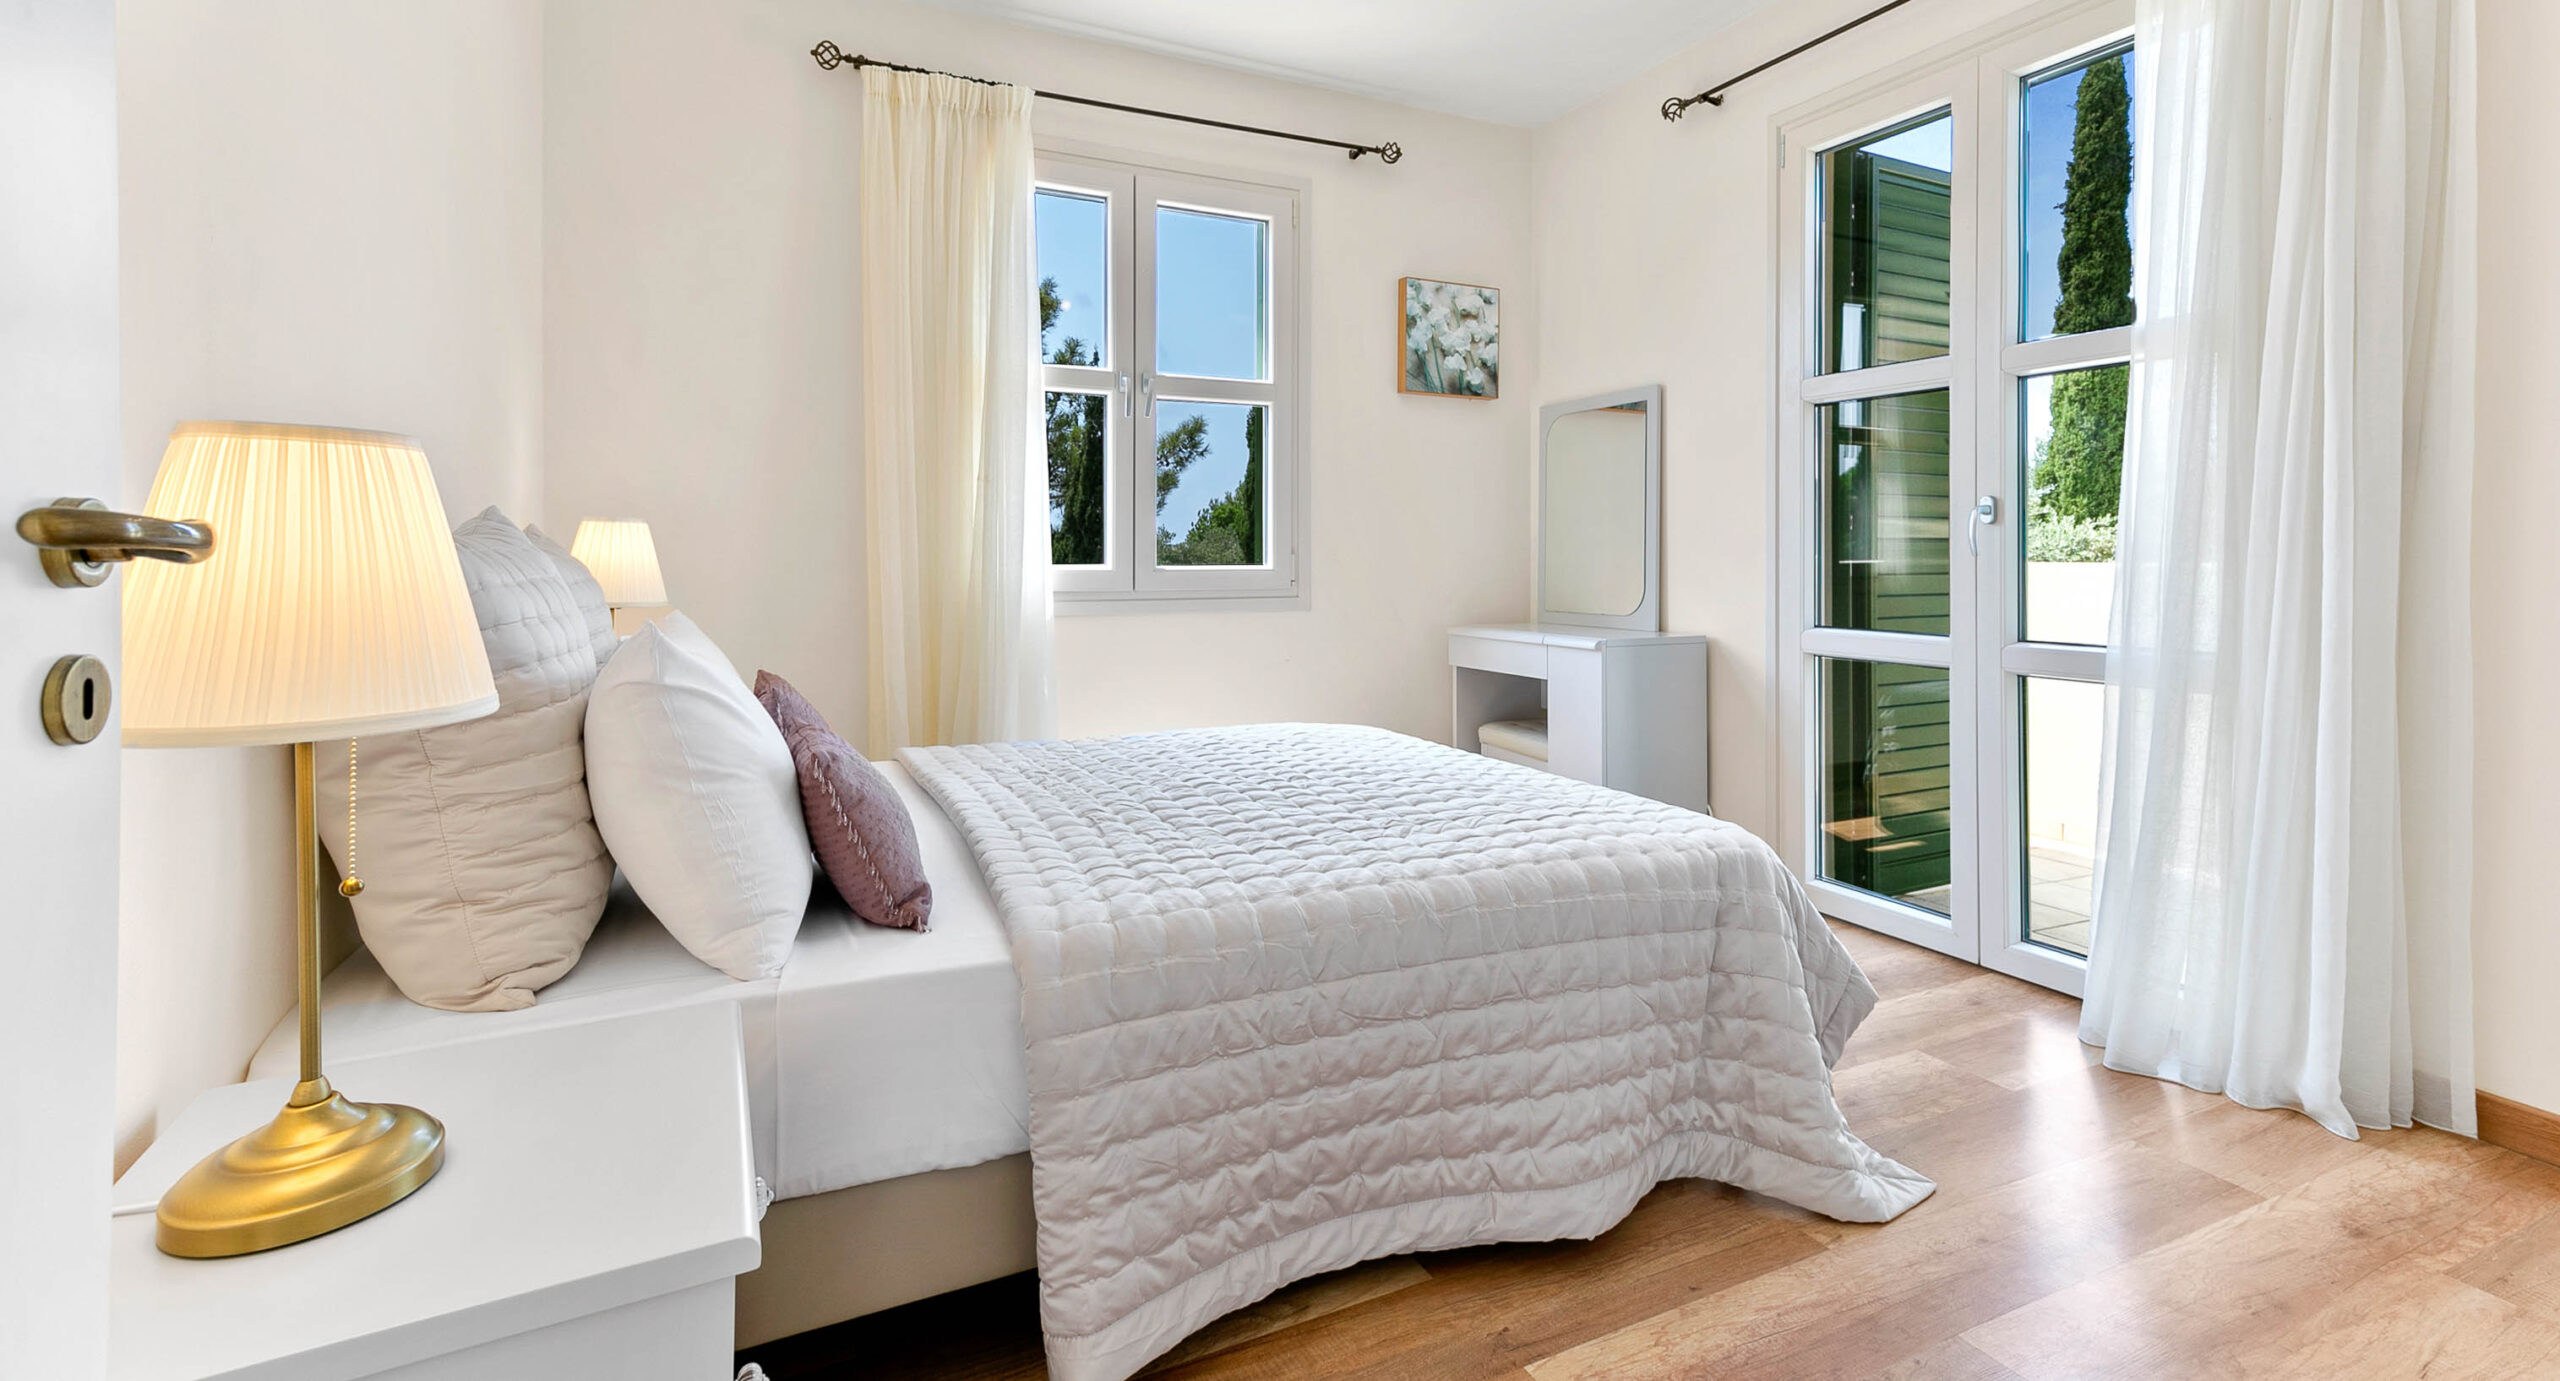 Photo of Junior Villa R1 on Aphrodite Hills - showing the master bedroom with balcony